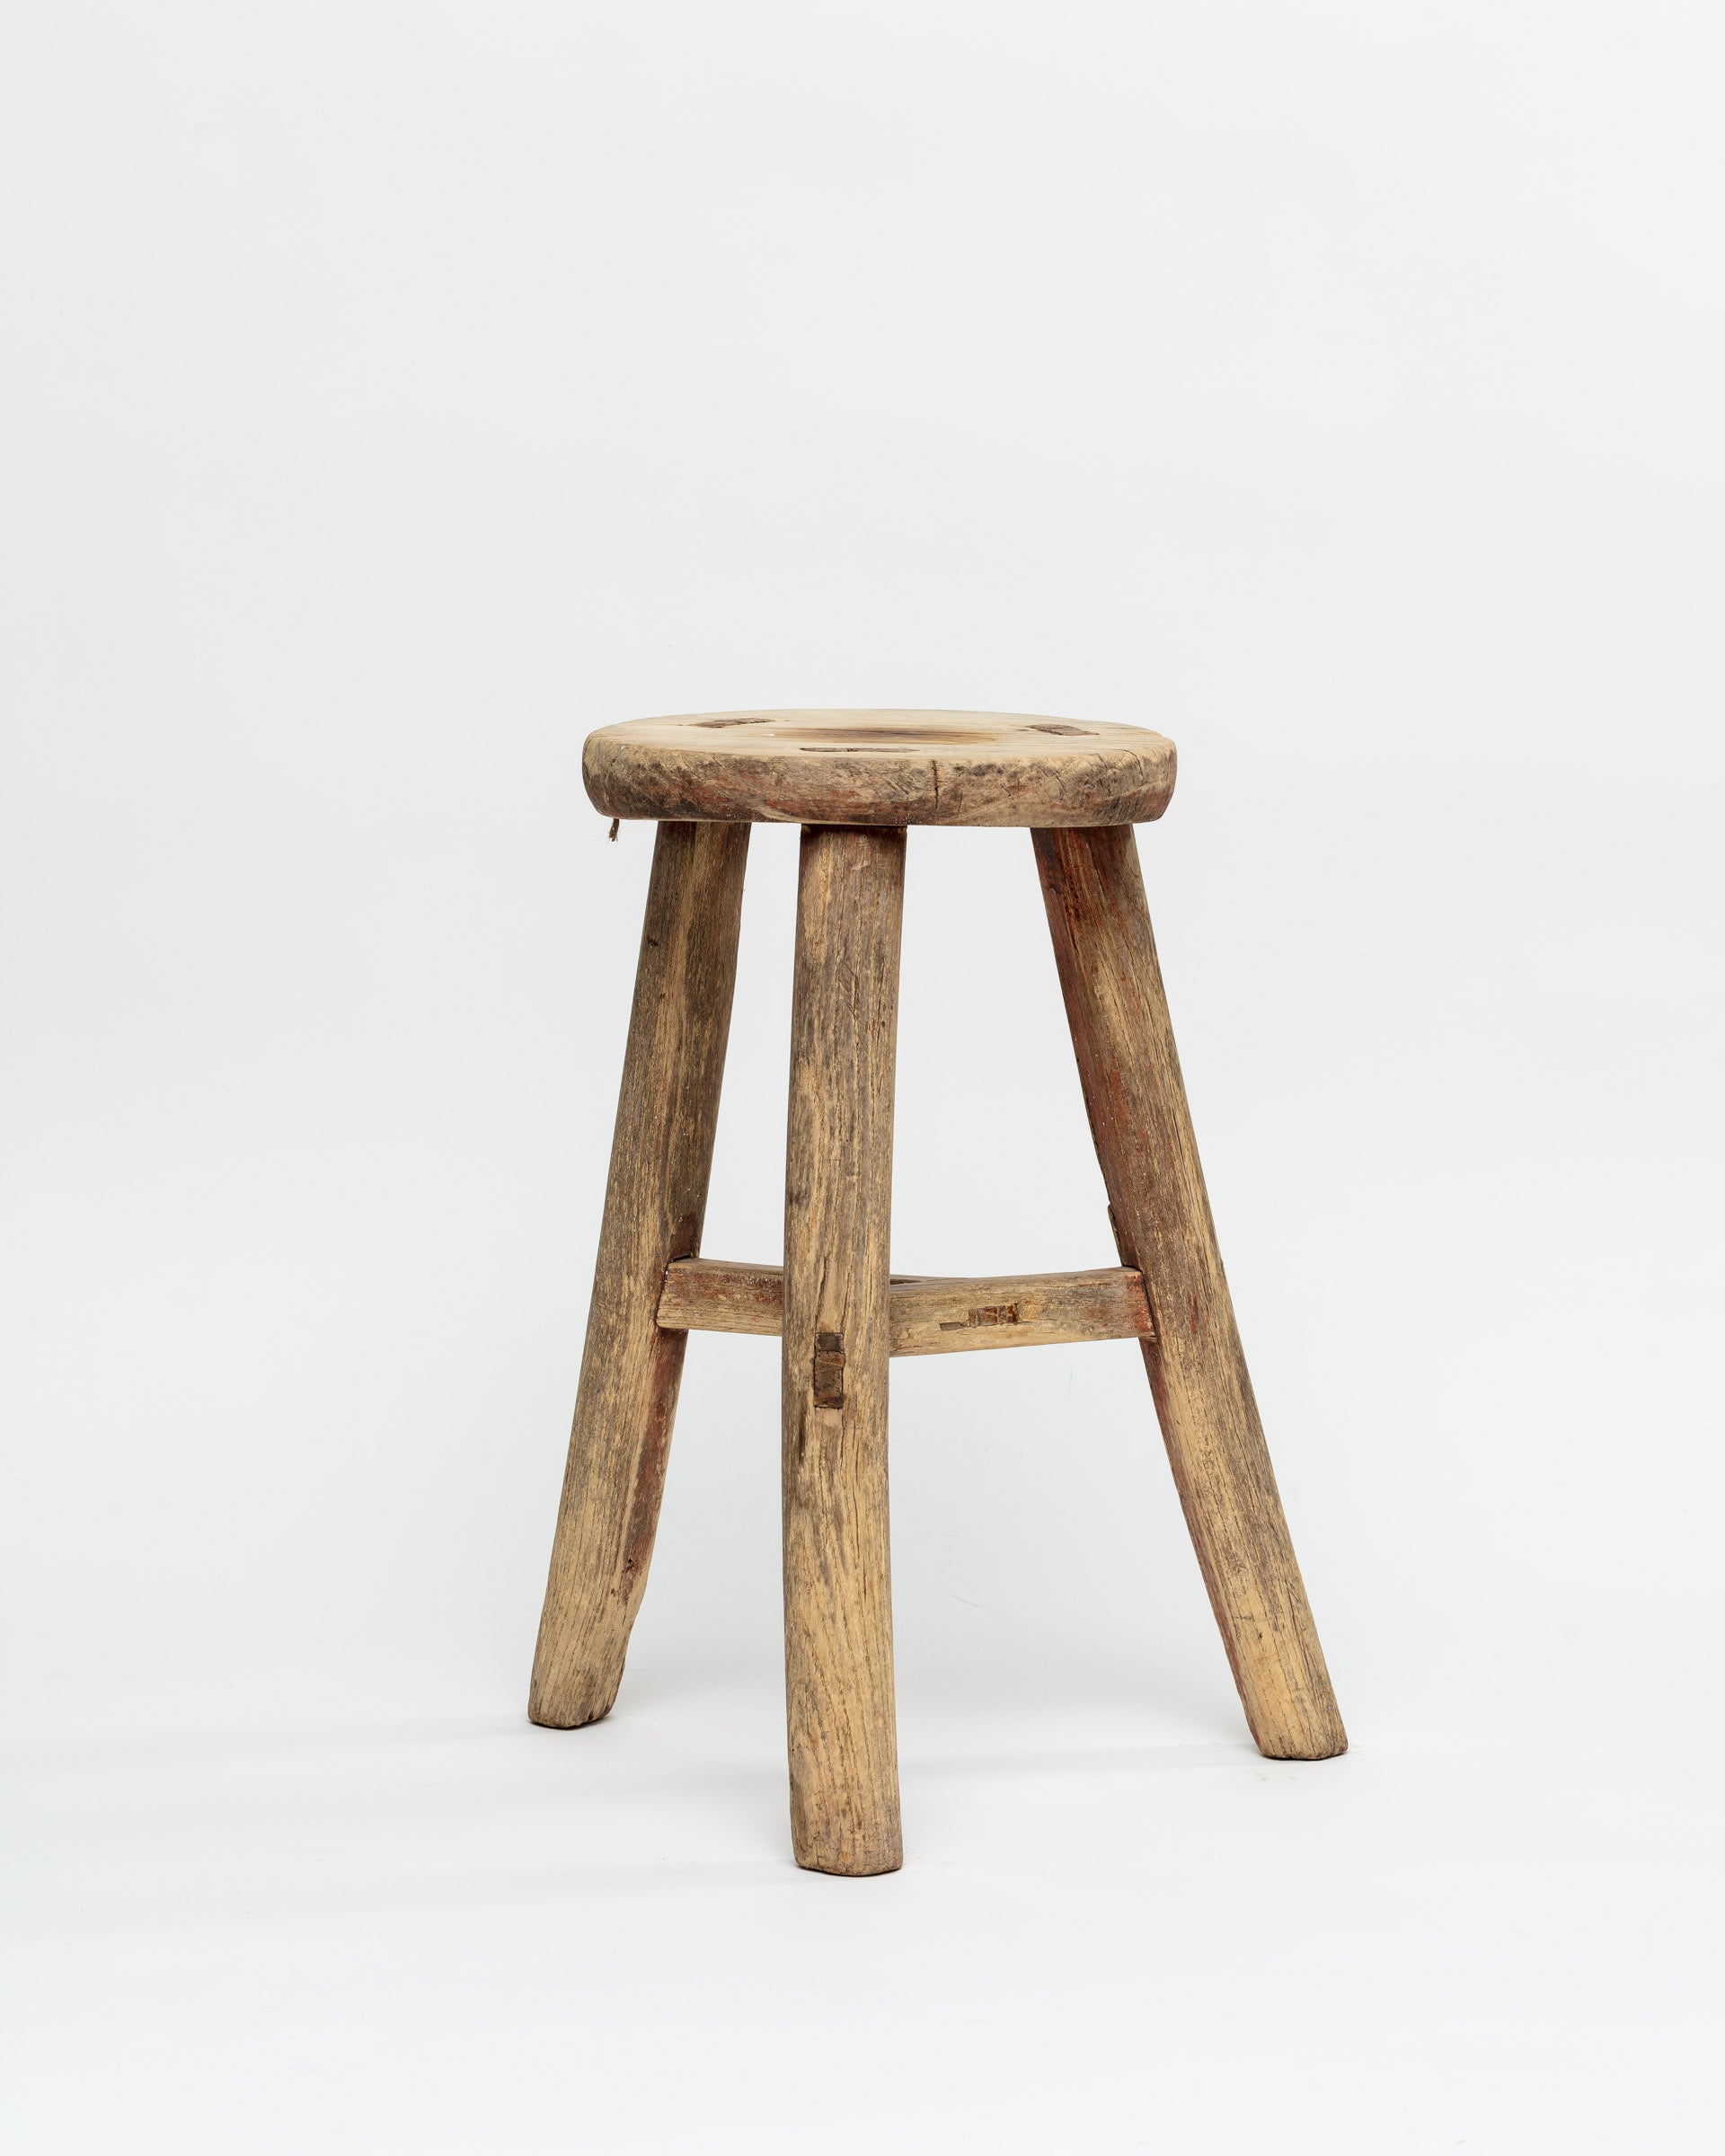 A handmade vintage ROUND STOOL 48 with timeless elegance, featuring a rustic wooden seat and four sturdy legs from Indus Design Imports. The stool boasts a worn, natural wood finish, giving it a well-used appearance that highlights its artisan craftsmanship. The background is plain white.